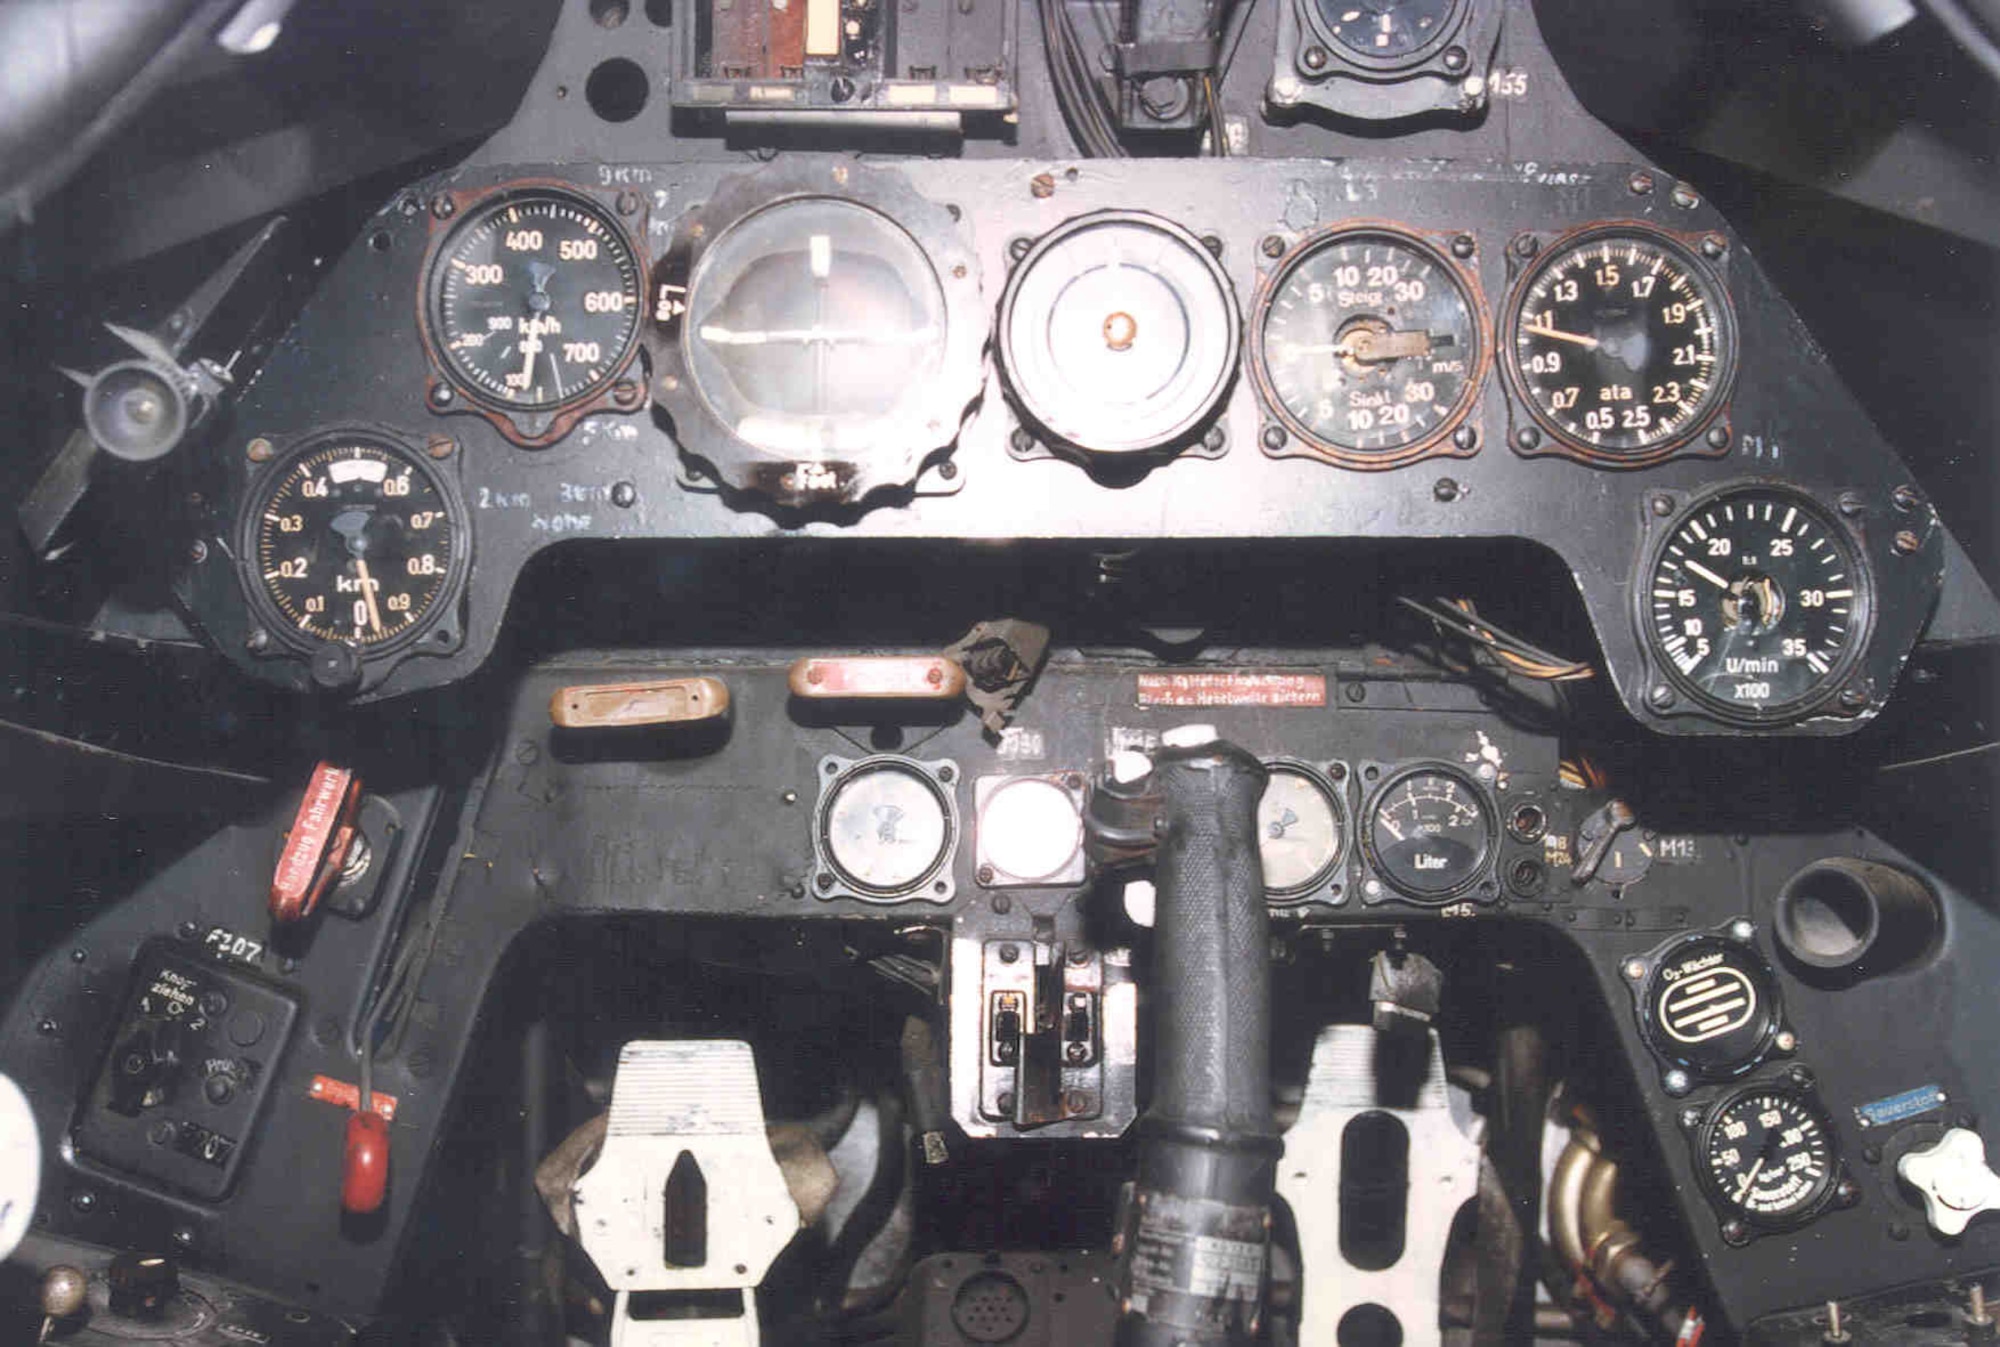 DAYTON, Ohio - Focke-Wulf Fw 190D-9 cockpit at the National Museum of the U.S. Air Force. (U.S. Air Force photo)